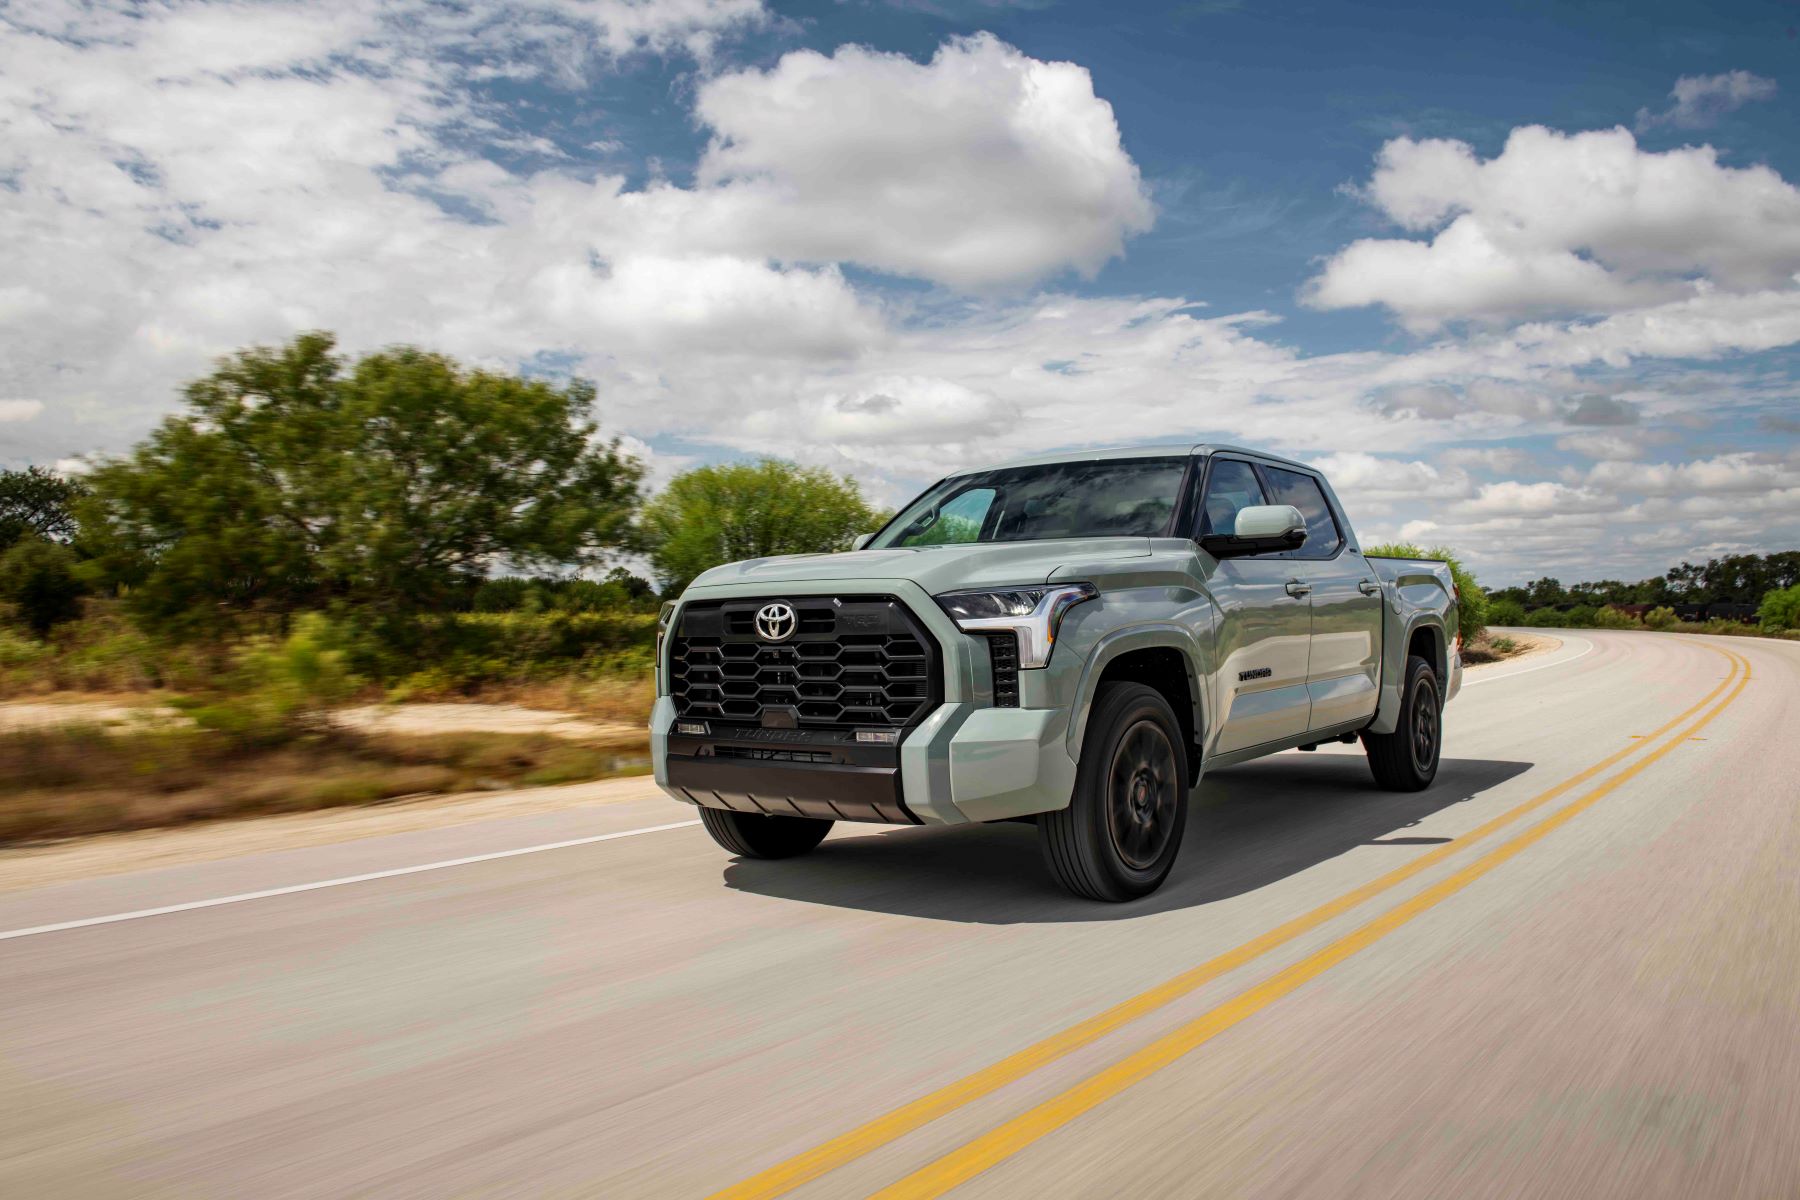 2022 Toyota Tundra SR5 TRD Sport full-size pickup truck with Lunar Rock paint color option